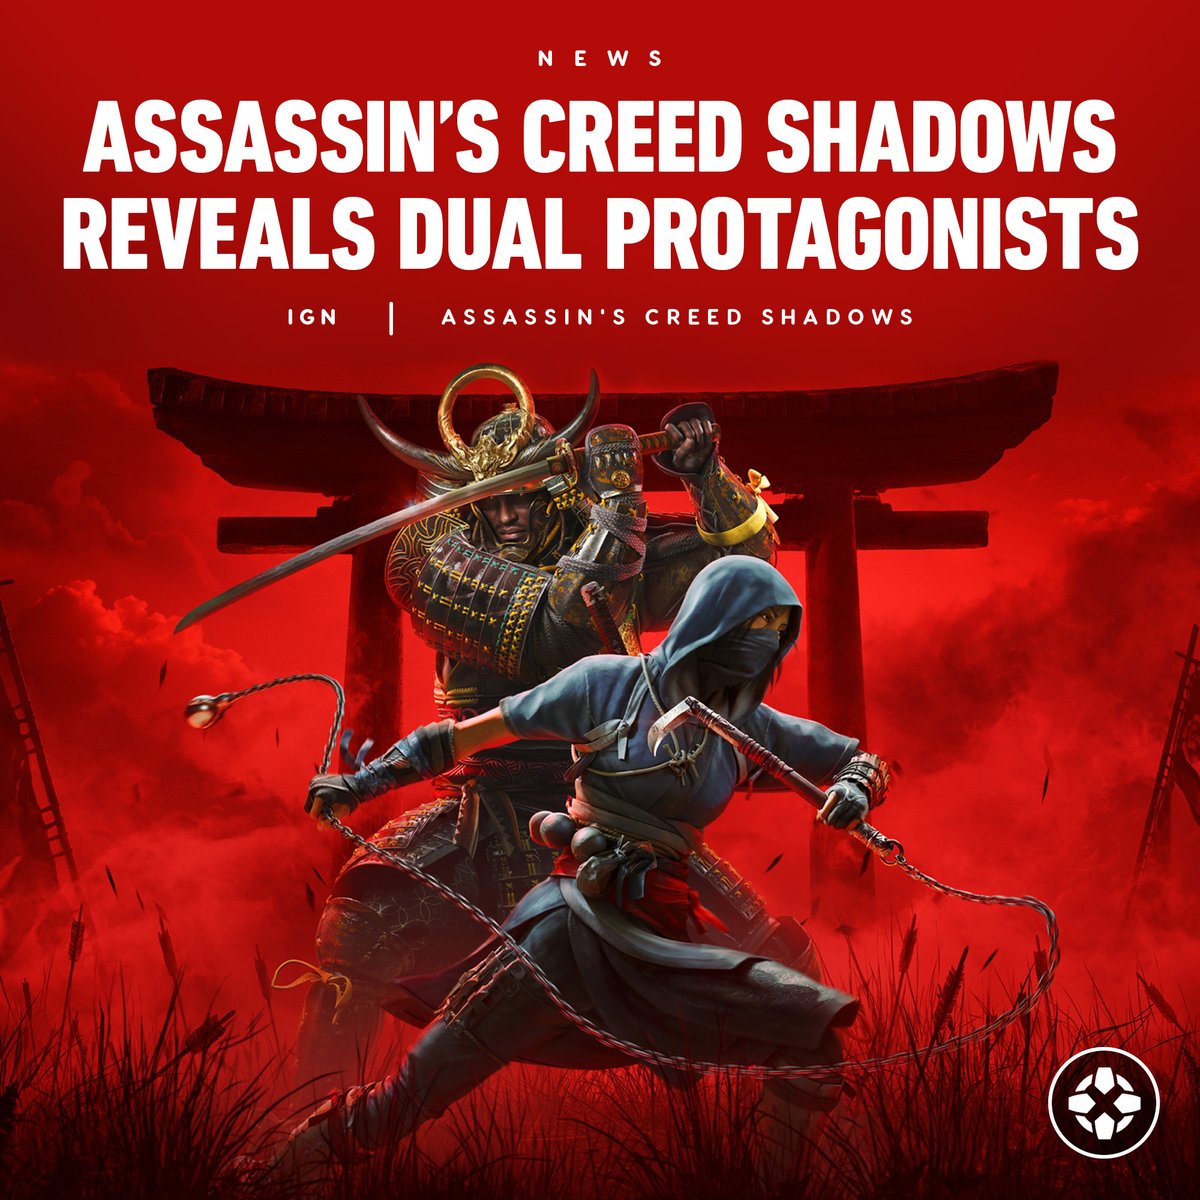 In Assassin's Creed Shadows you play as two protagonists: real historical figure, Yasuke, the legendary ‘African Samurai’ and fictional shinobi, Naoe. bit.ly/4dKussb